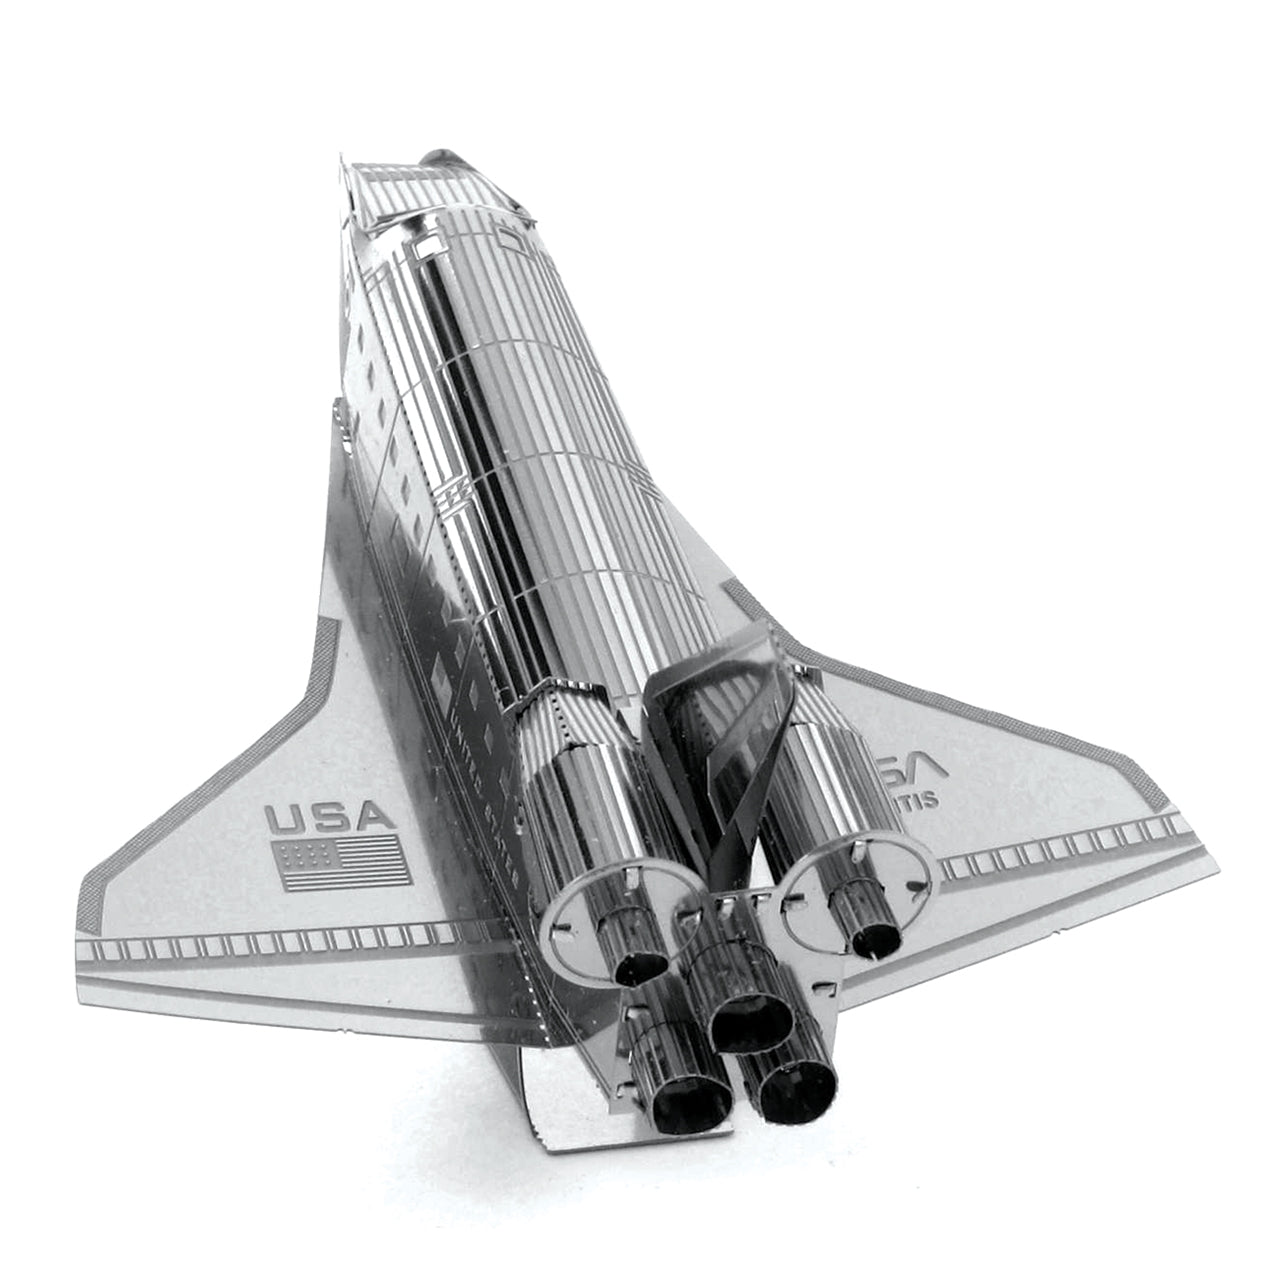 Space Shuttle Discovery - 3D Model Kit - Metal Earth gift puzzle puzzle